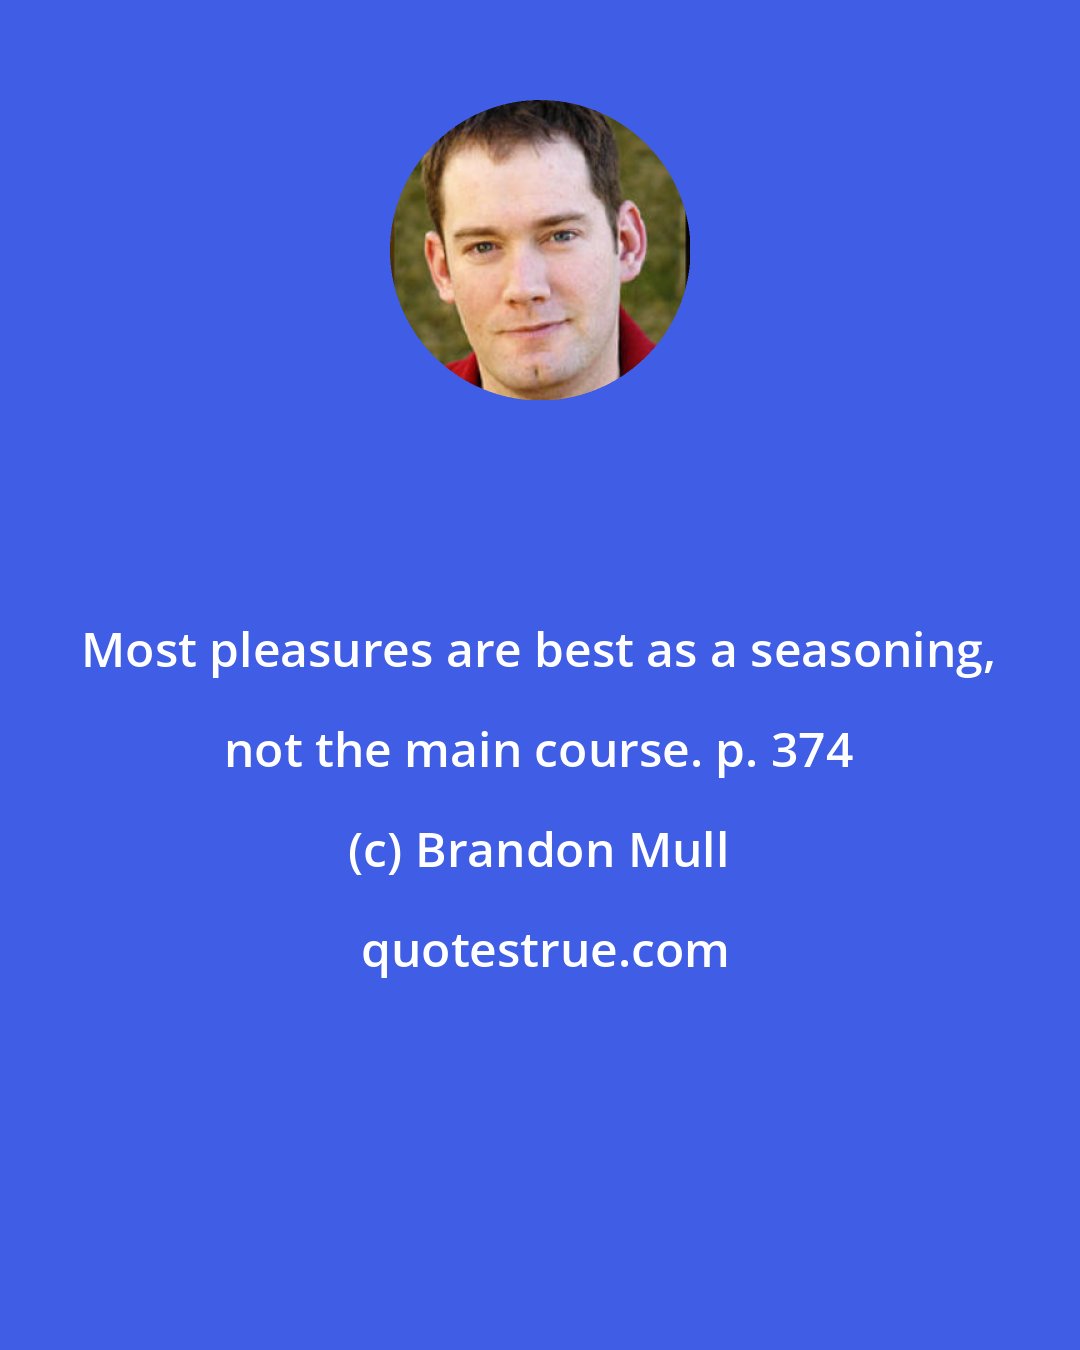 Brandon Mull: Most pleasures are best as a seasoning, not the main course. p. 374